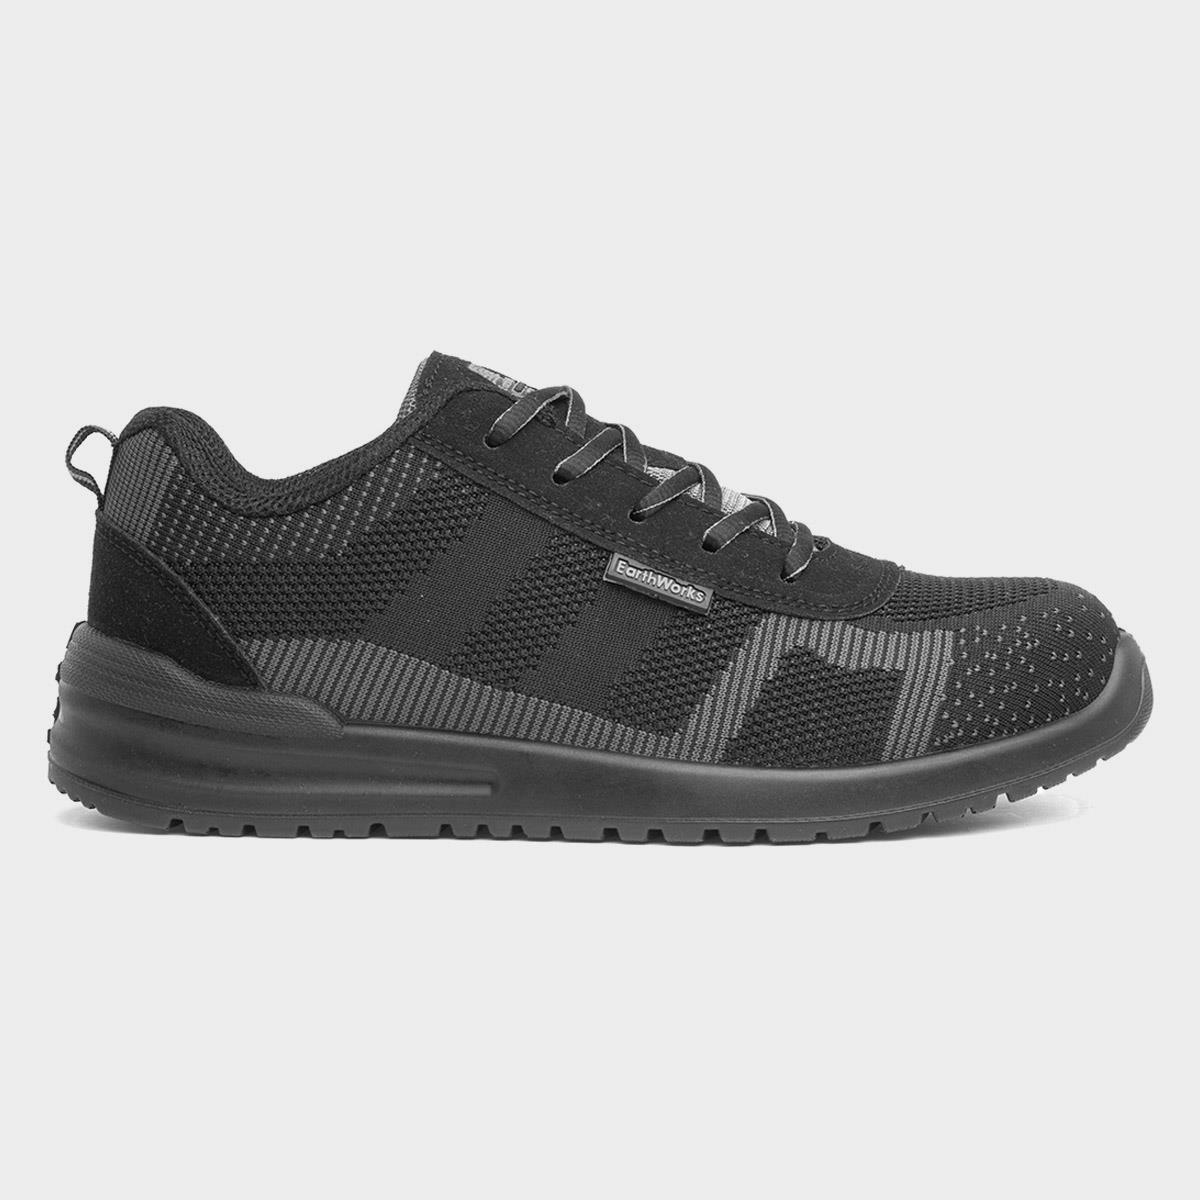 EarthWorks Chisel Adults Black Lace Up Safety Shoe-55209 | Shoe Zone